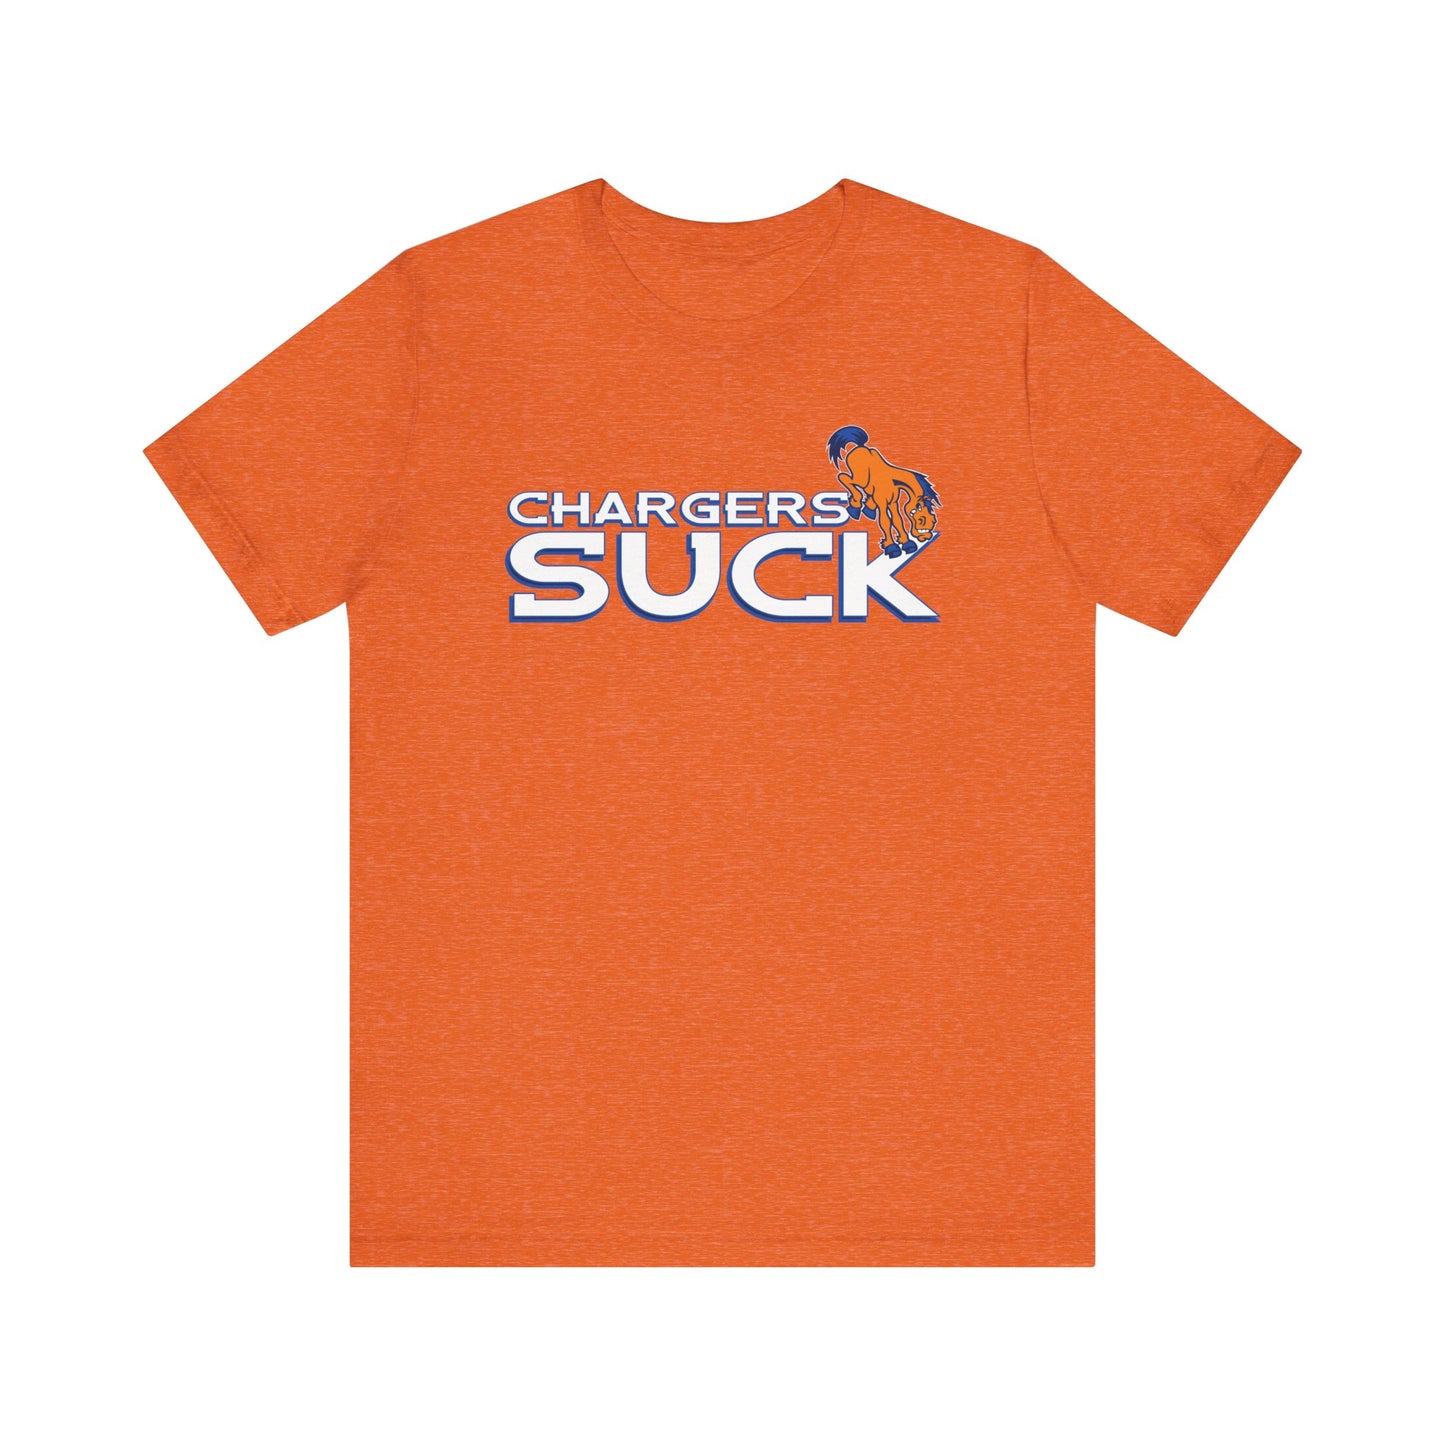 That Team Without Fans Sucks - Unisex Jersey Short Sleeve Tee